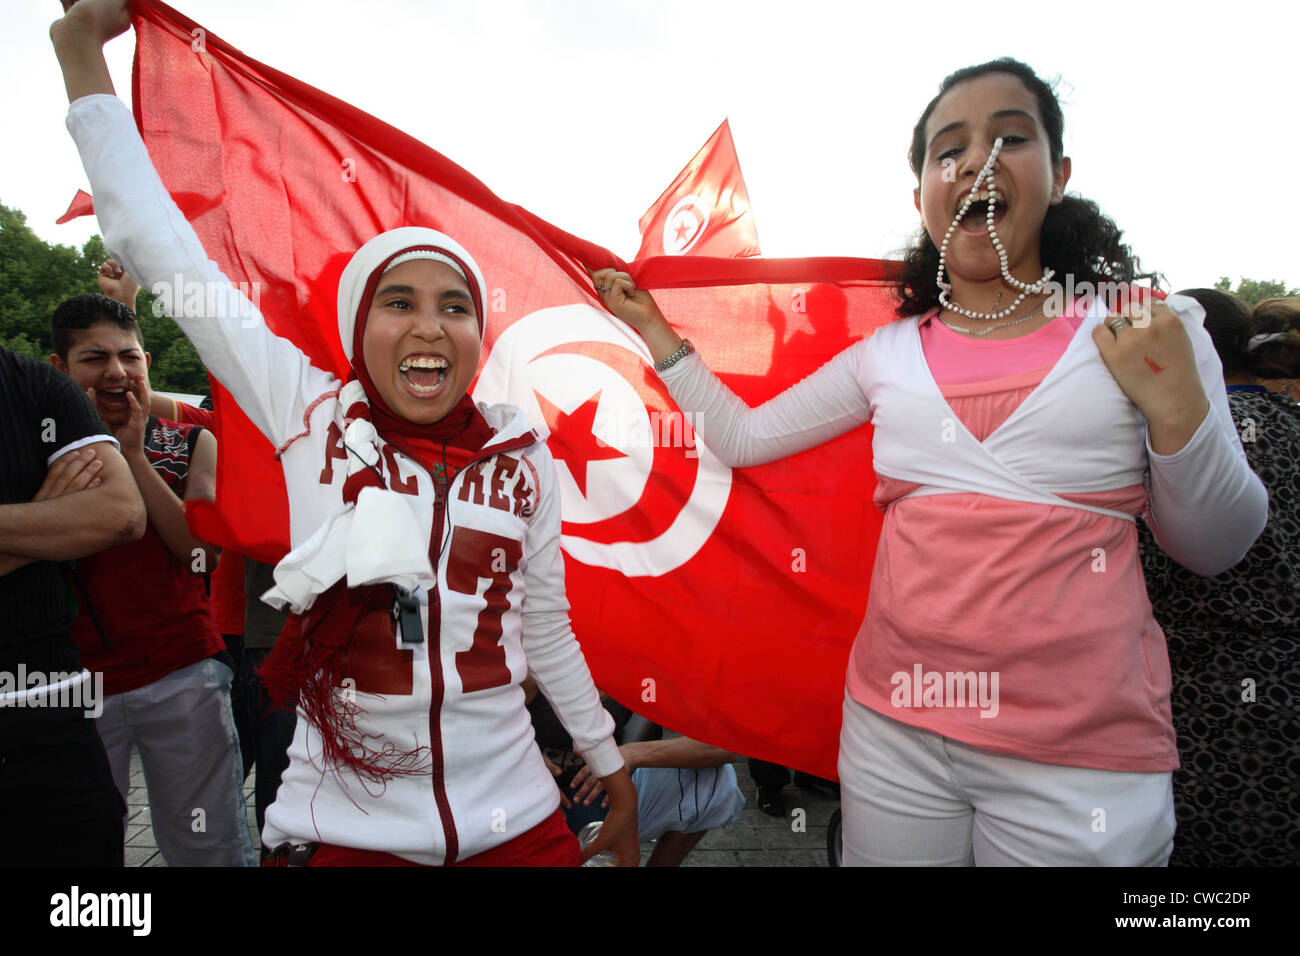 Soccer fans World Cup 2006: Cheering girl with Tunisian flag Stock Photo